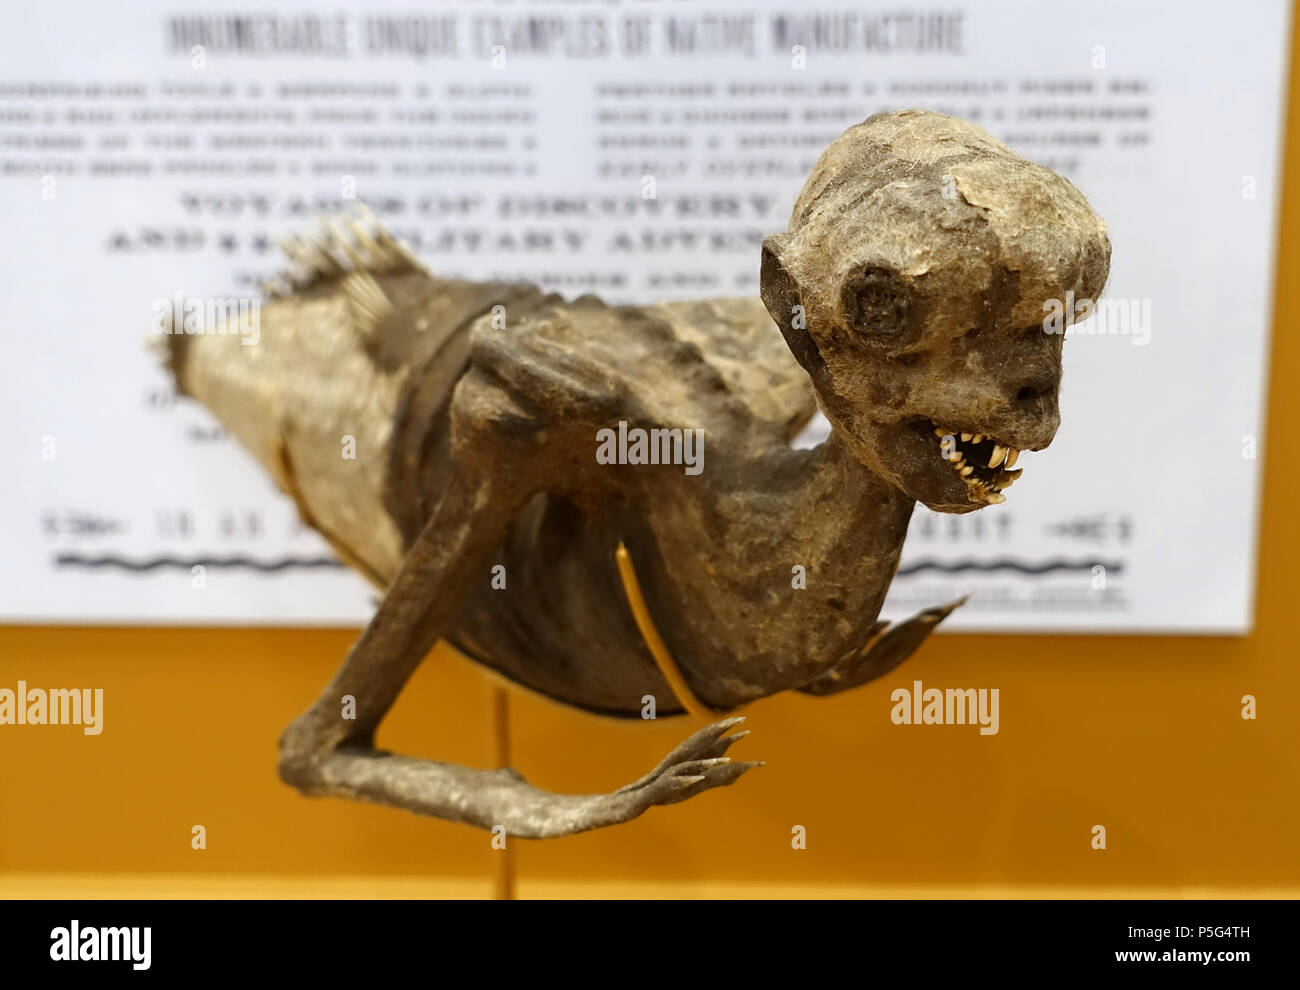 N/A. English: Exhibit from the Peabody Museum, Harvard University, Cambridge, Massachusetts, USA. Photography was permitted without restriction; exhibit is old enough so that it is in the . 27 May 2017, 16:05:03. Daderot 551 Feejee Mermaid, shown in P.T. Barnum's American Museum, 1842, as leased from Moses Kimball of the Boston Museum, papier-mache - Peabody Museum, Harvard University - DSC06156 Stock Photo